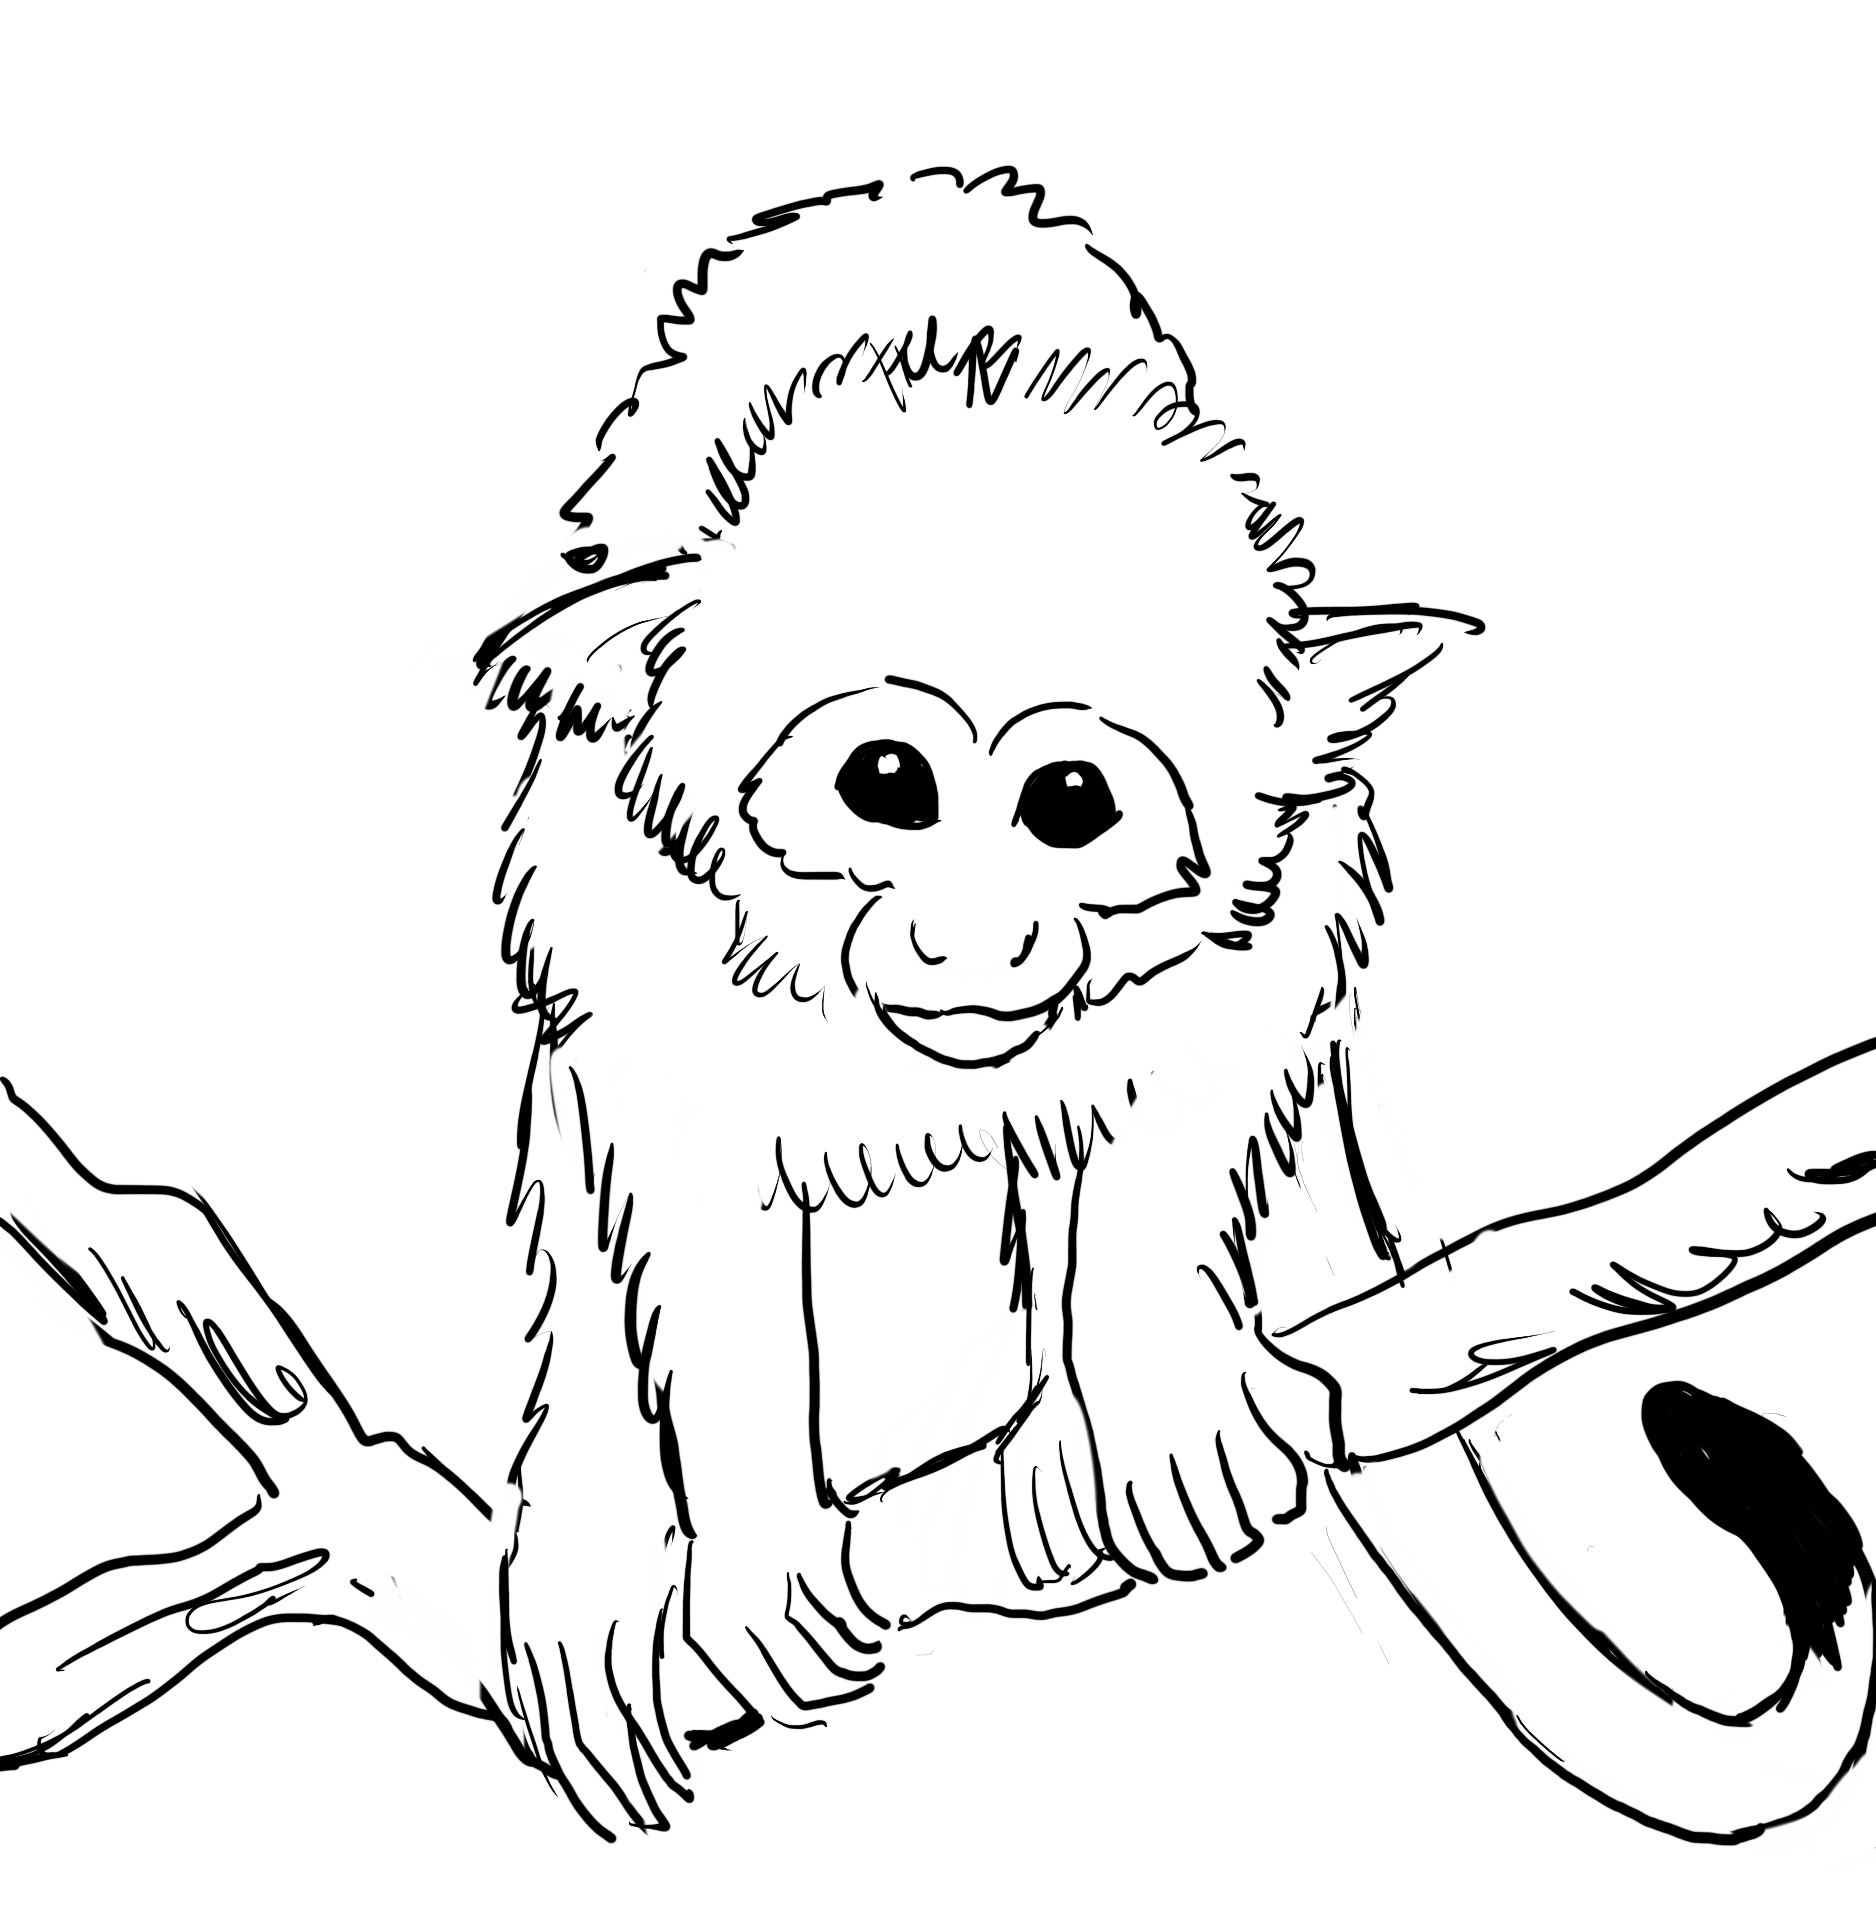 Squirrel monkey coloring page